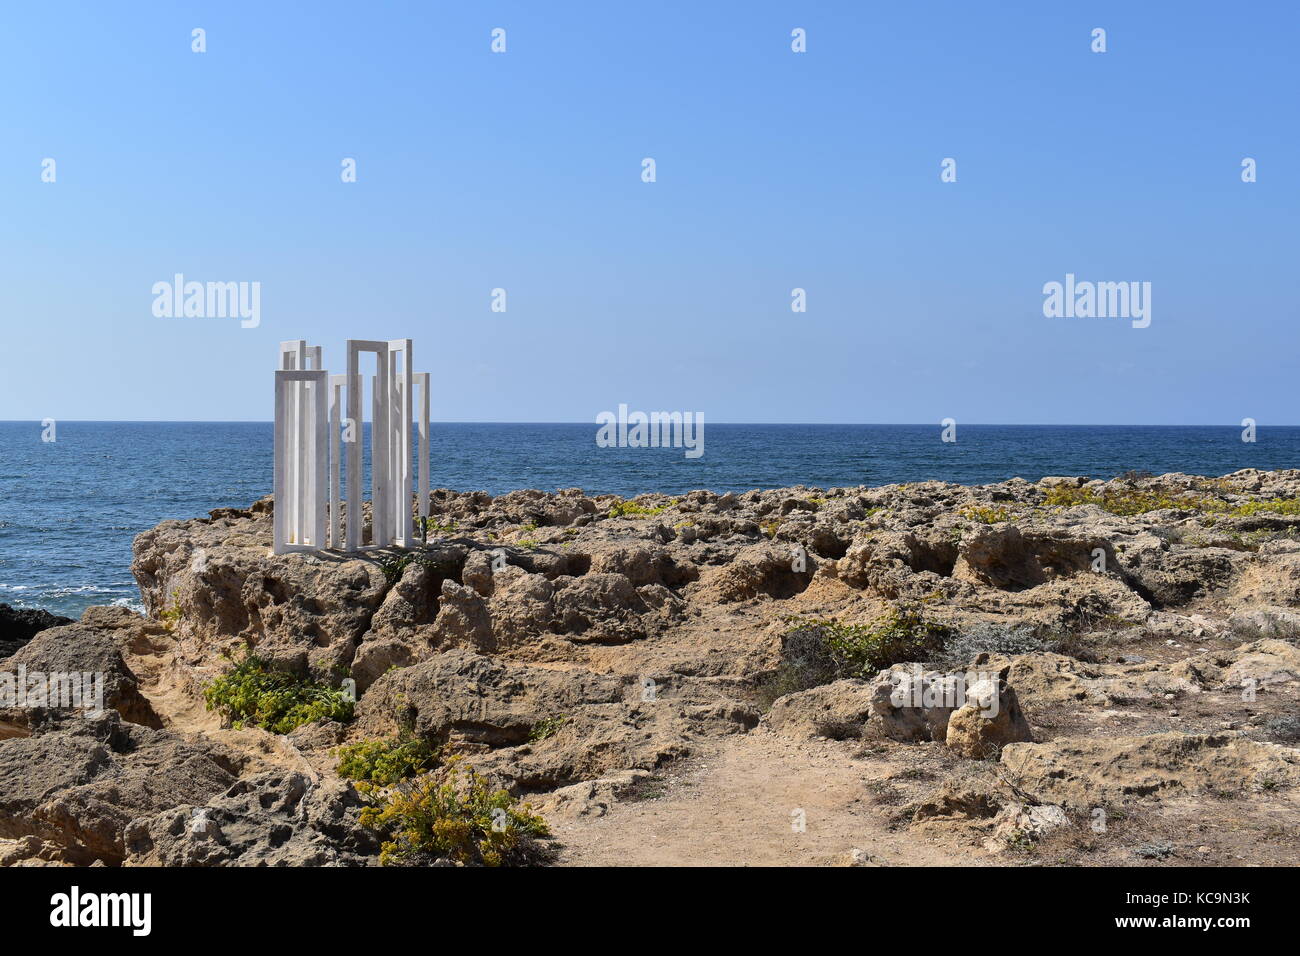 Geometric sculpture by Cypriot artist Charis Paspallis on Paphos seafront, as part of the Pafos2017 European Capital of Culture framework. Stock Photo